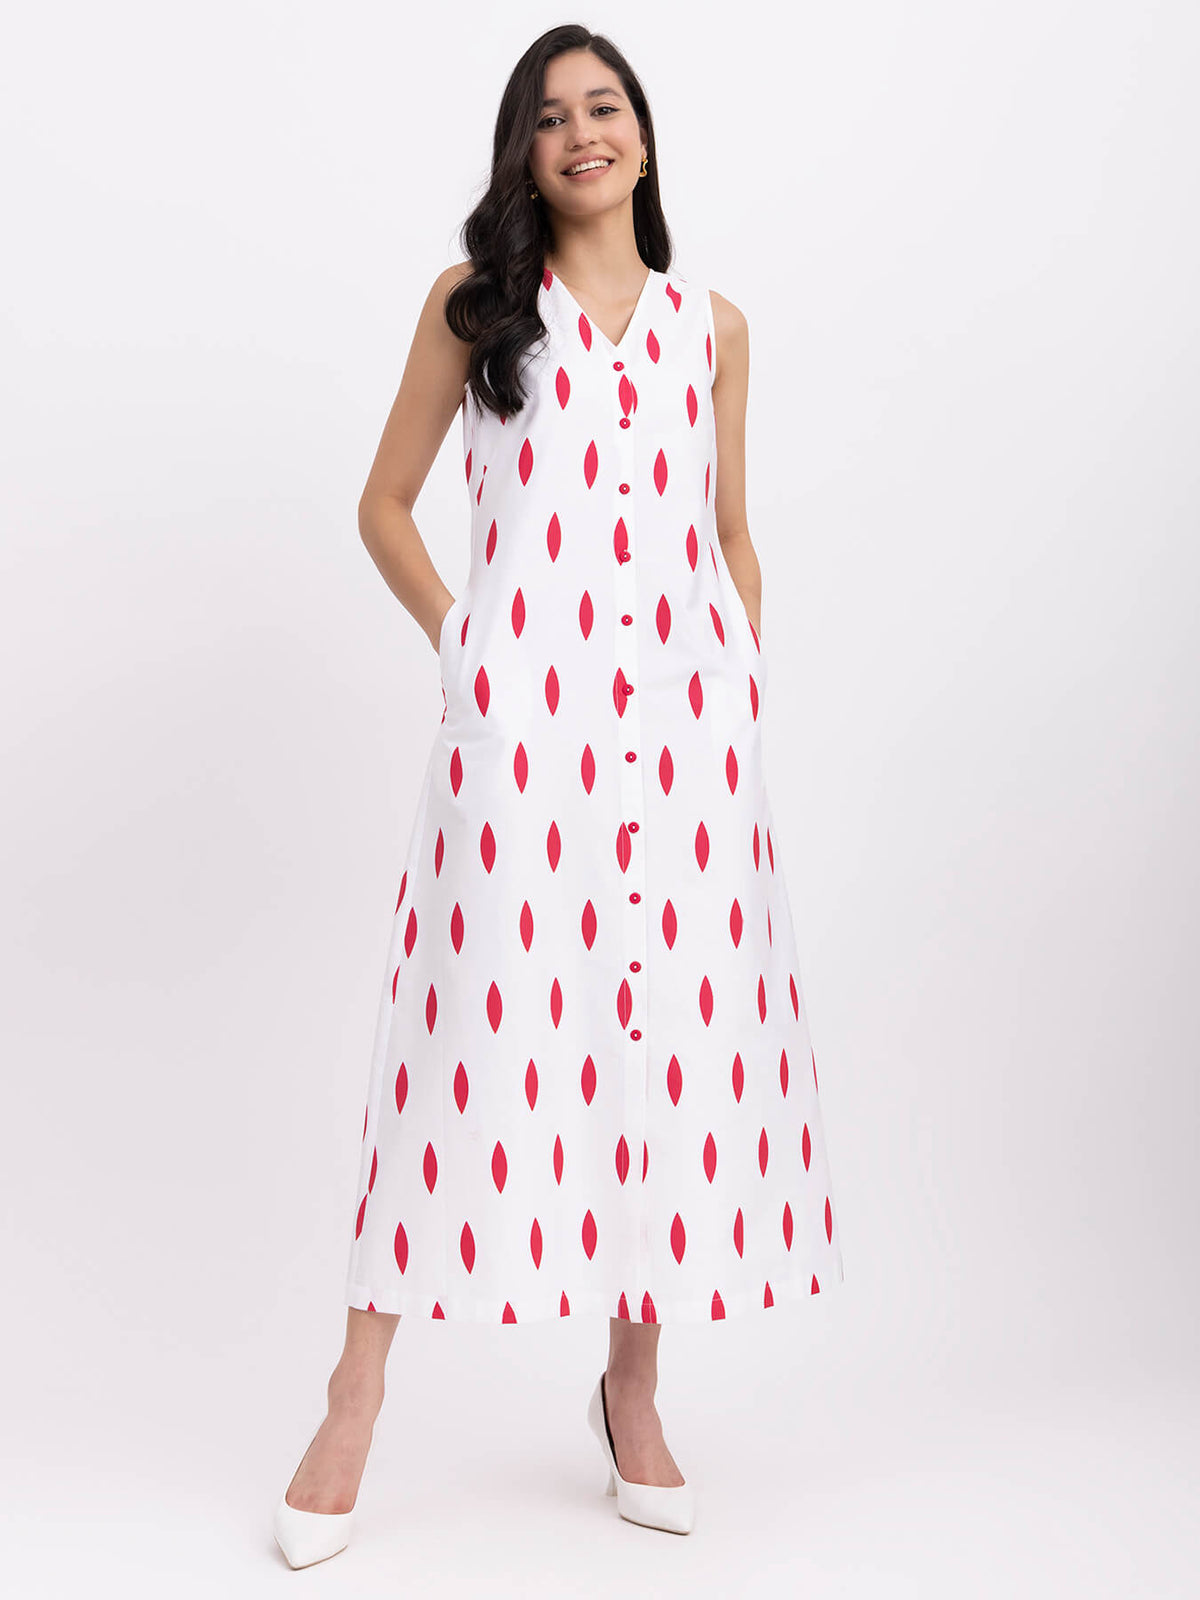 Cotton Geometric Print Dress - White And Red